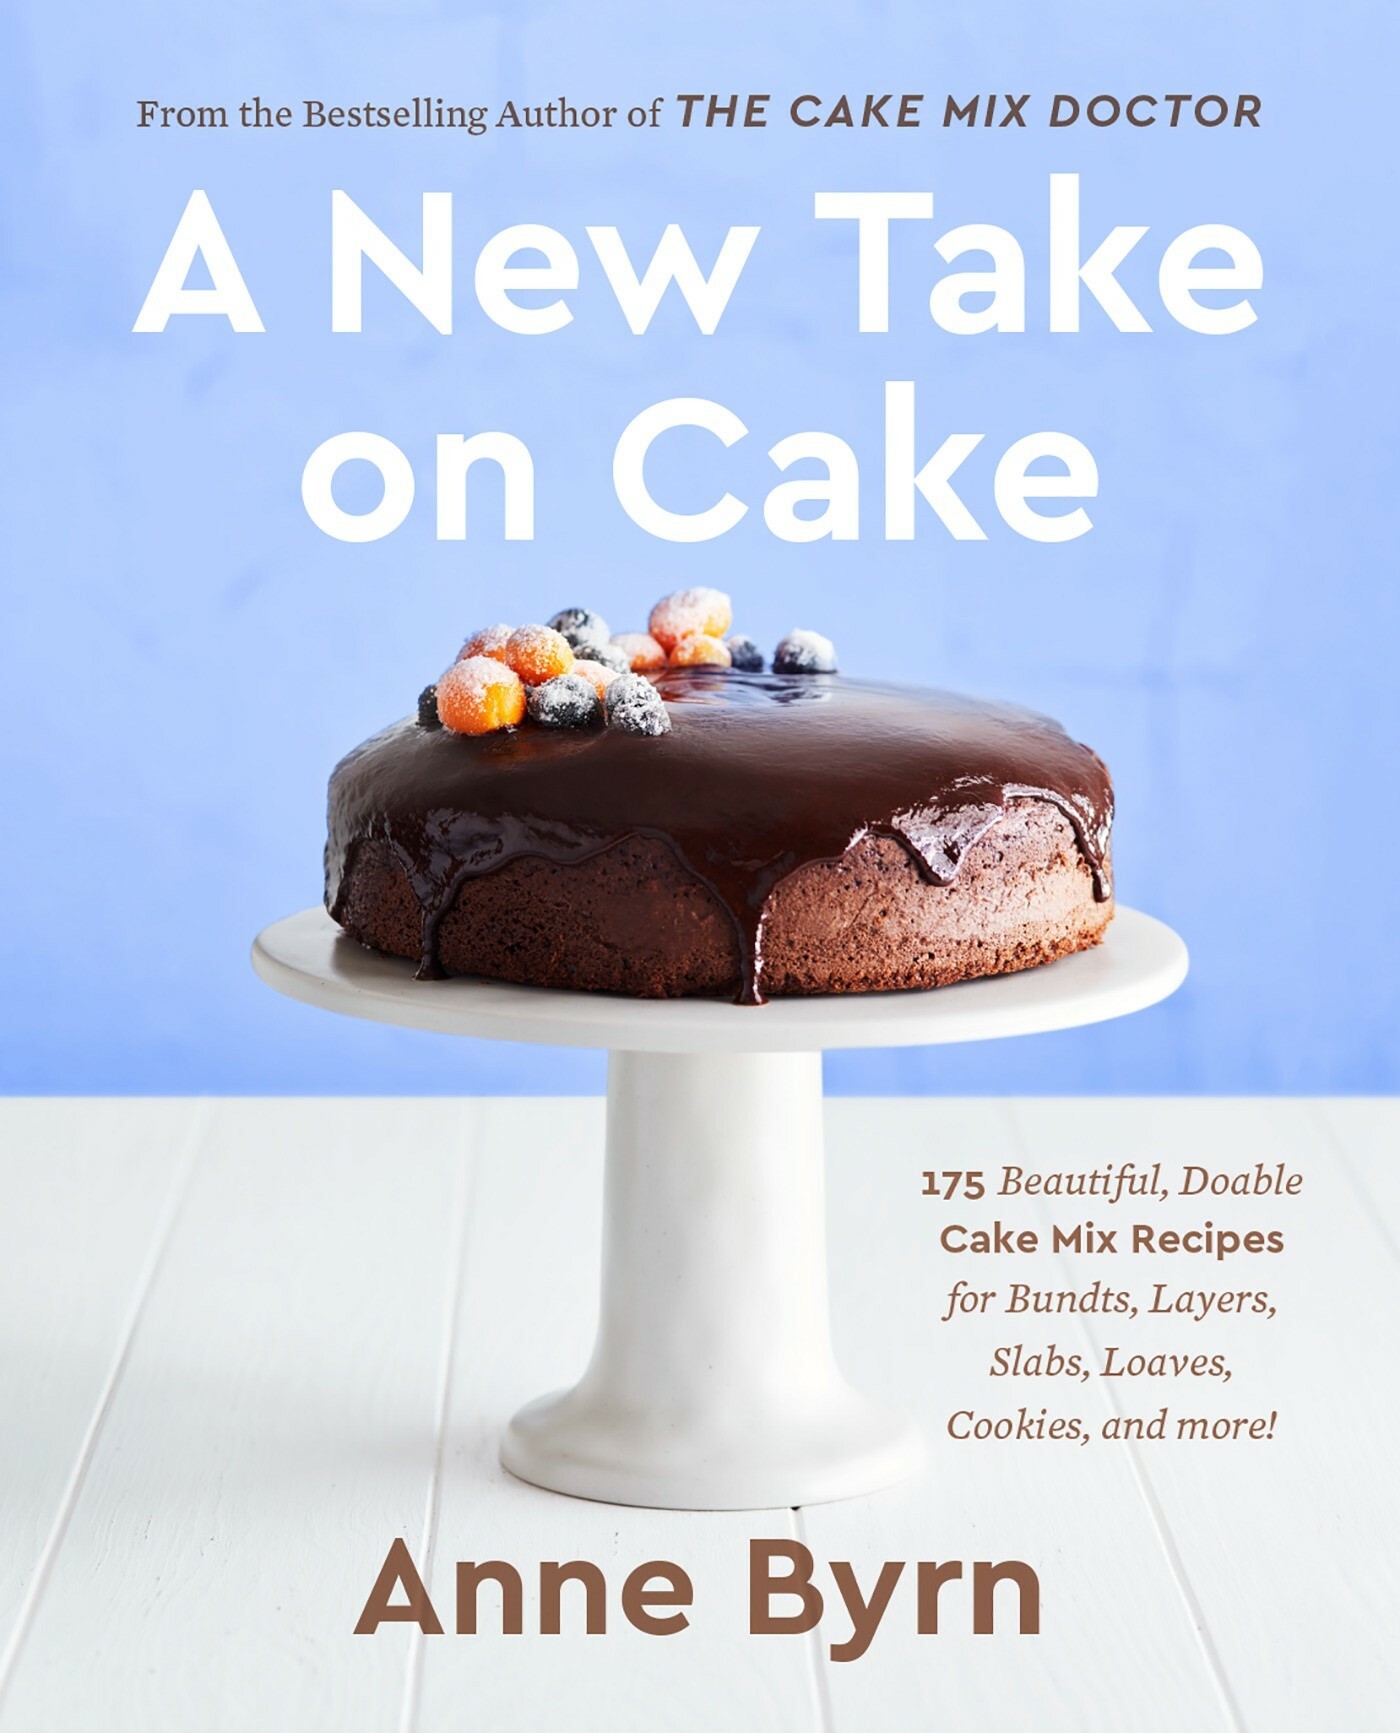 cover of, A New Take on Cake, from The Cake Mix Doctor, by Anne Byrn. Chocolate cake on a cake stand against a blue wall. 